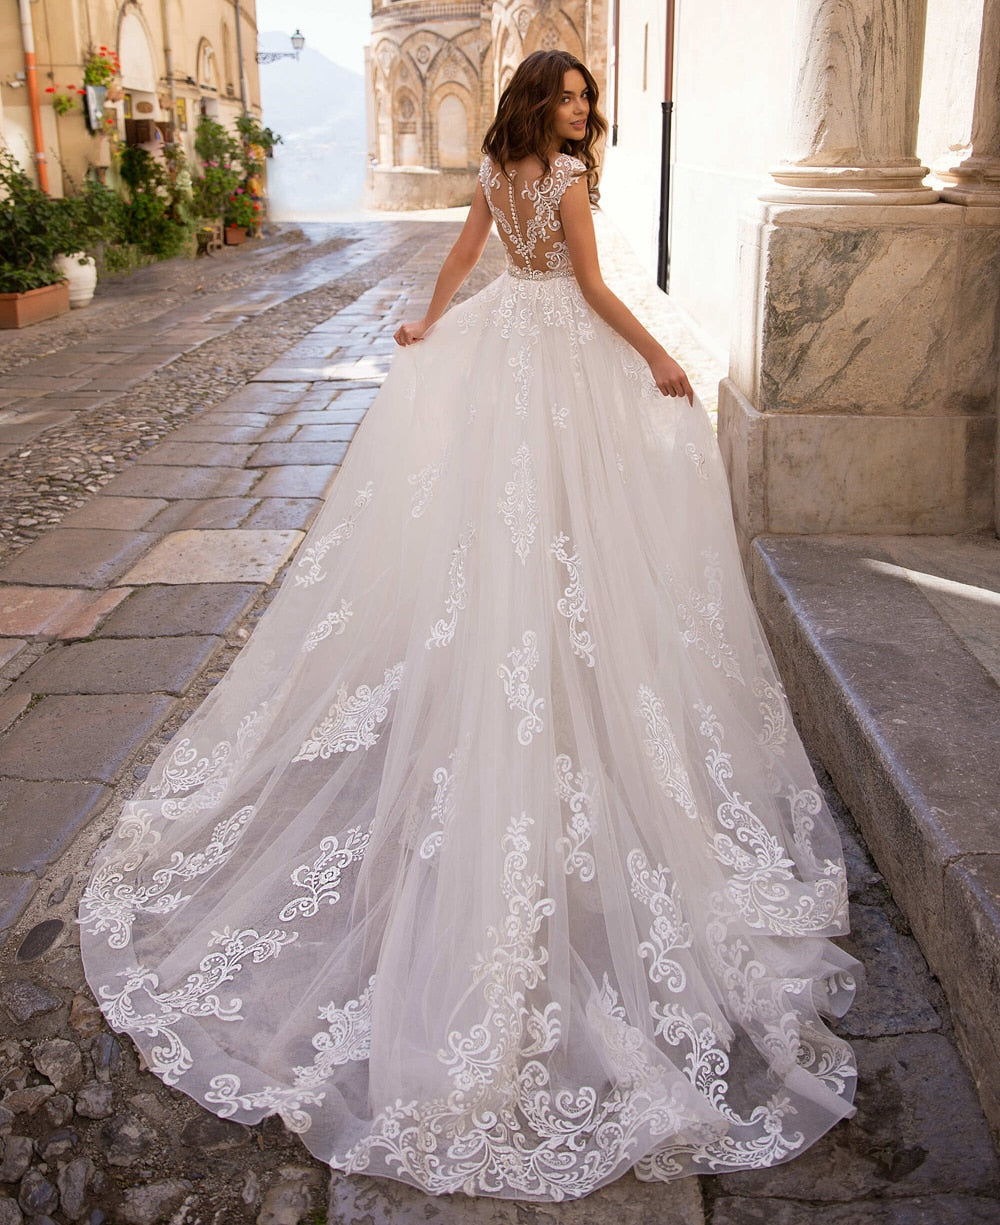 Bride Gown A-Line Appliques Tulle O-Neck Bridal Gowns Full Sleeves Elegant  Sexy Backless Beading Wedding Dresses Robe De Marie